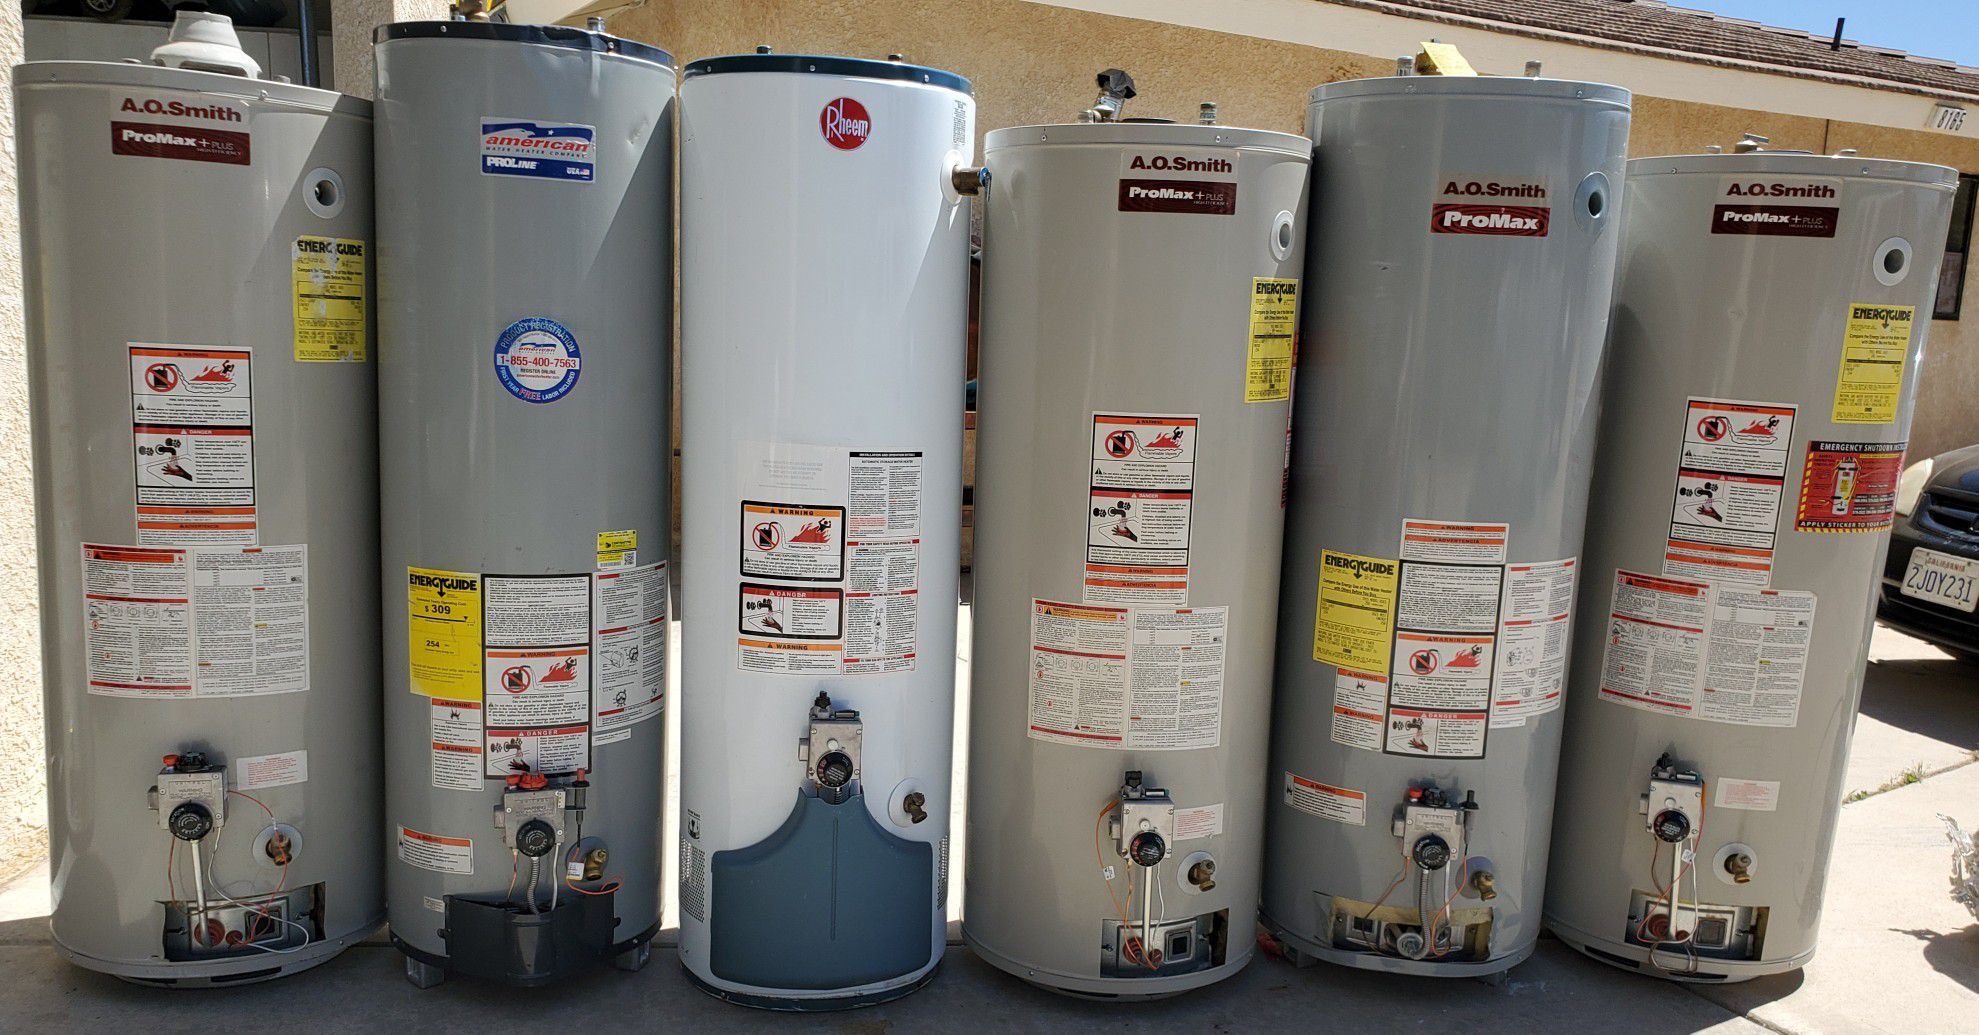 Water heaters in excellent condition